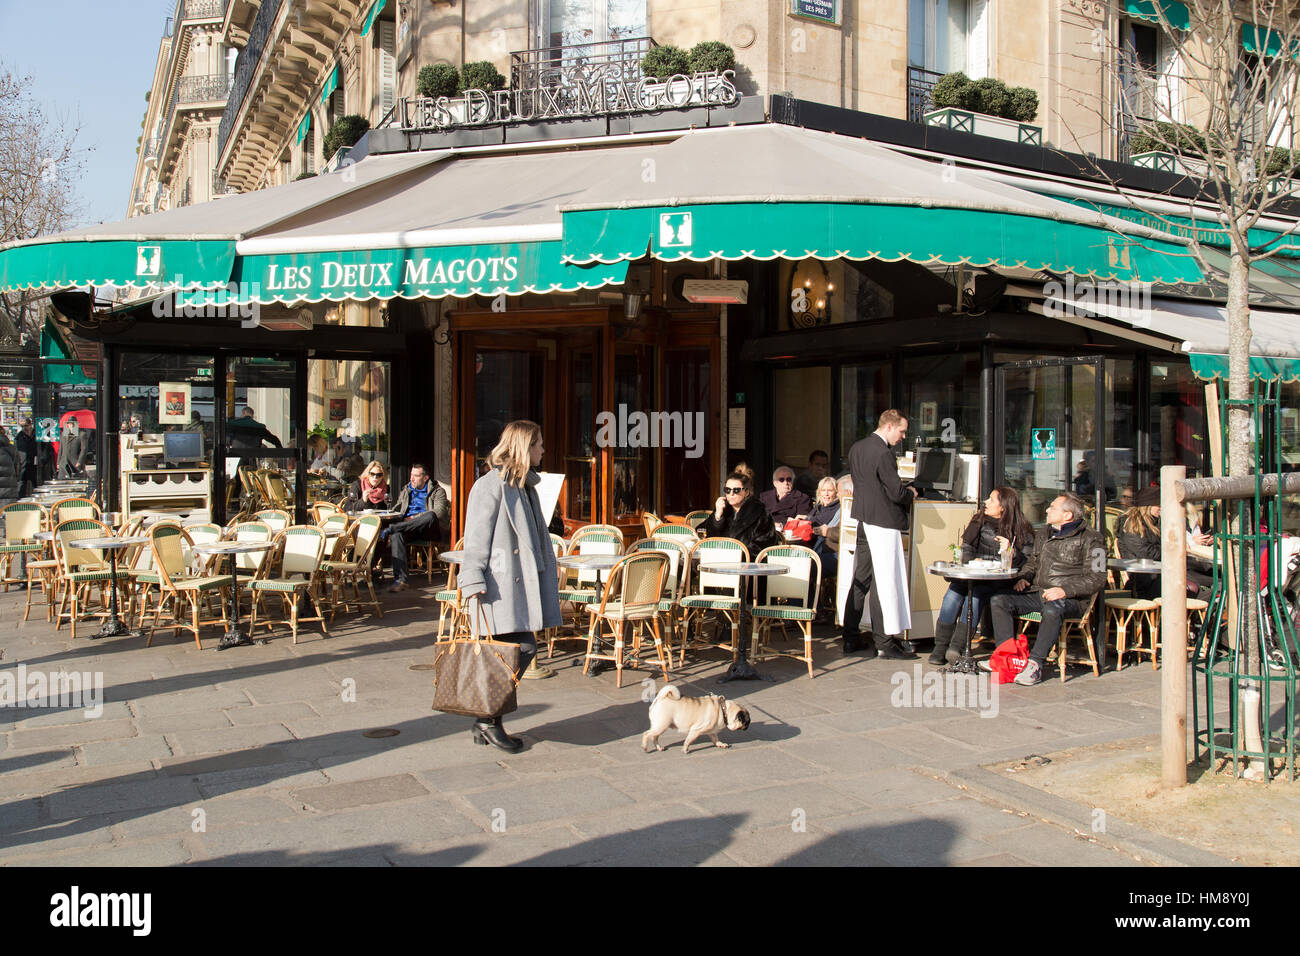 Tourists sitting outside Les Deux Magots cafe in Paris France in winter Stock Photo